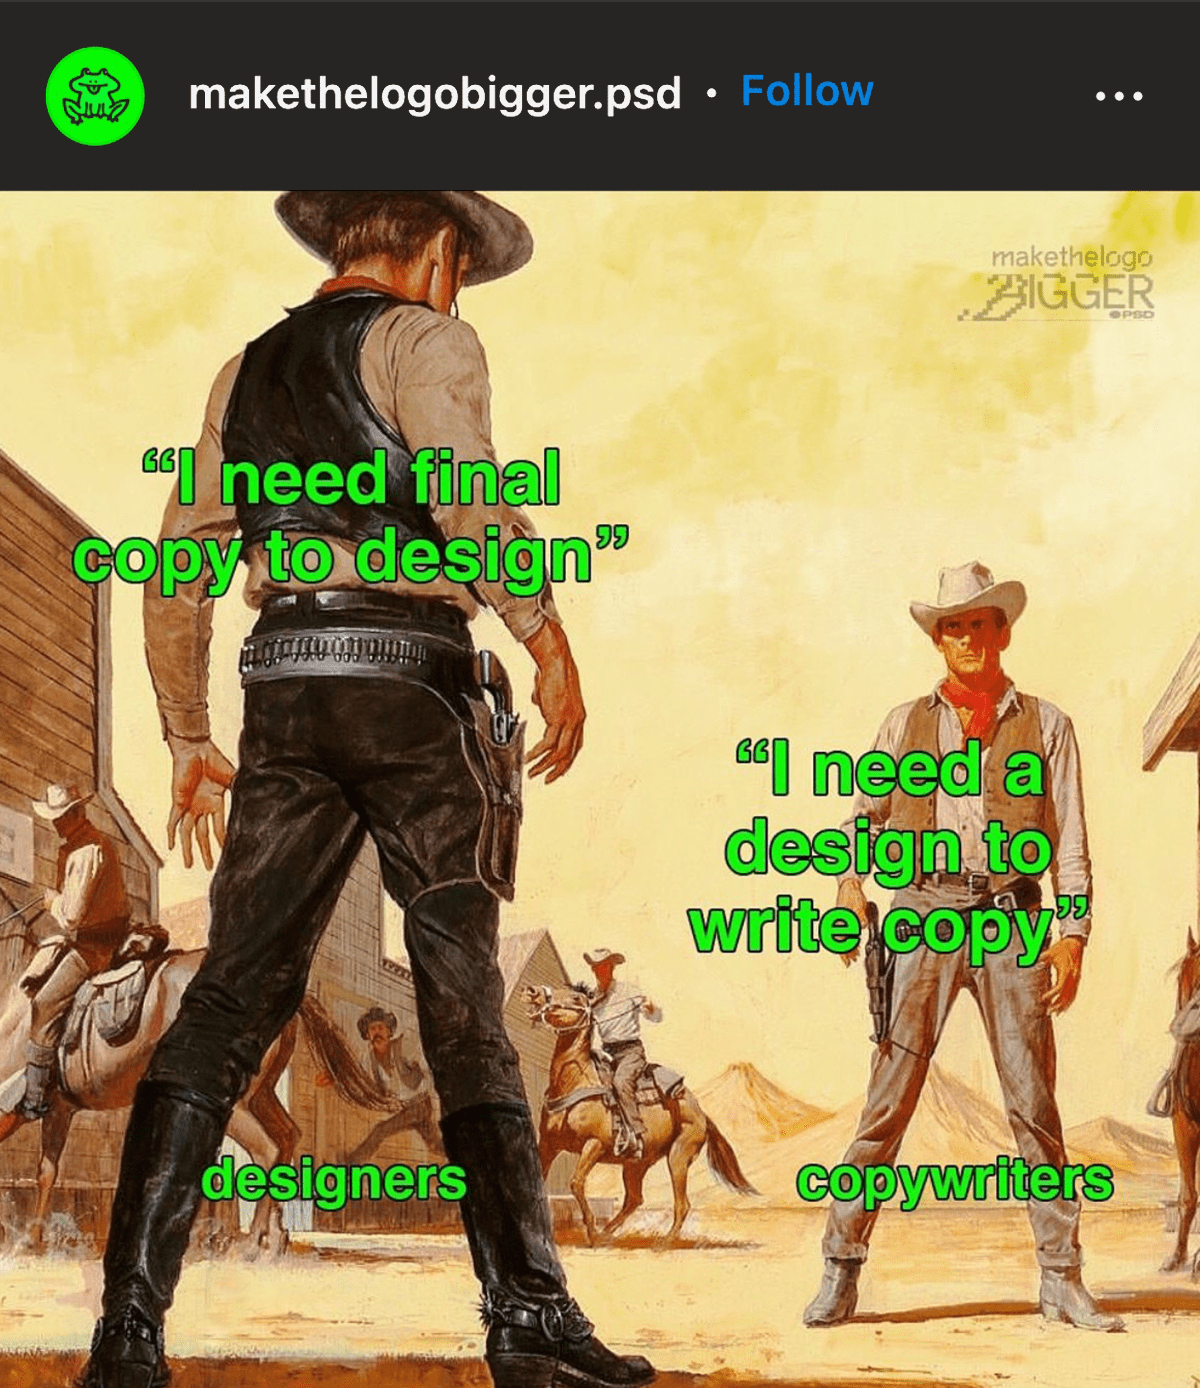 makethelogobigger.psd on Instagram: a showdown between two cowboys - a designer saying I need final copy to design and a copywriter saying I need a design to write copy